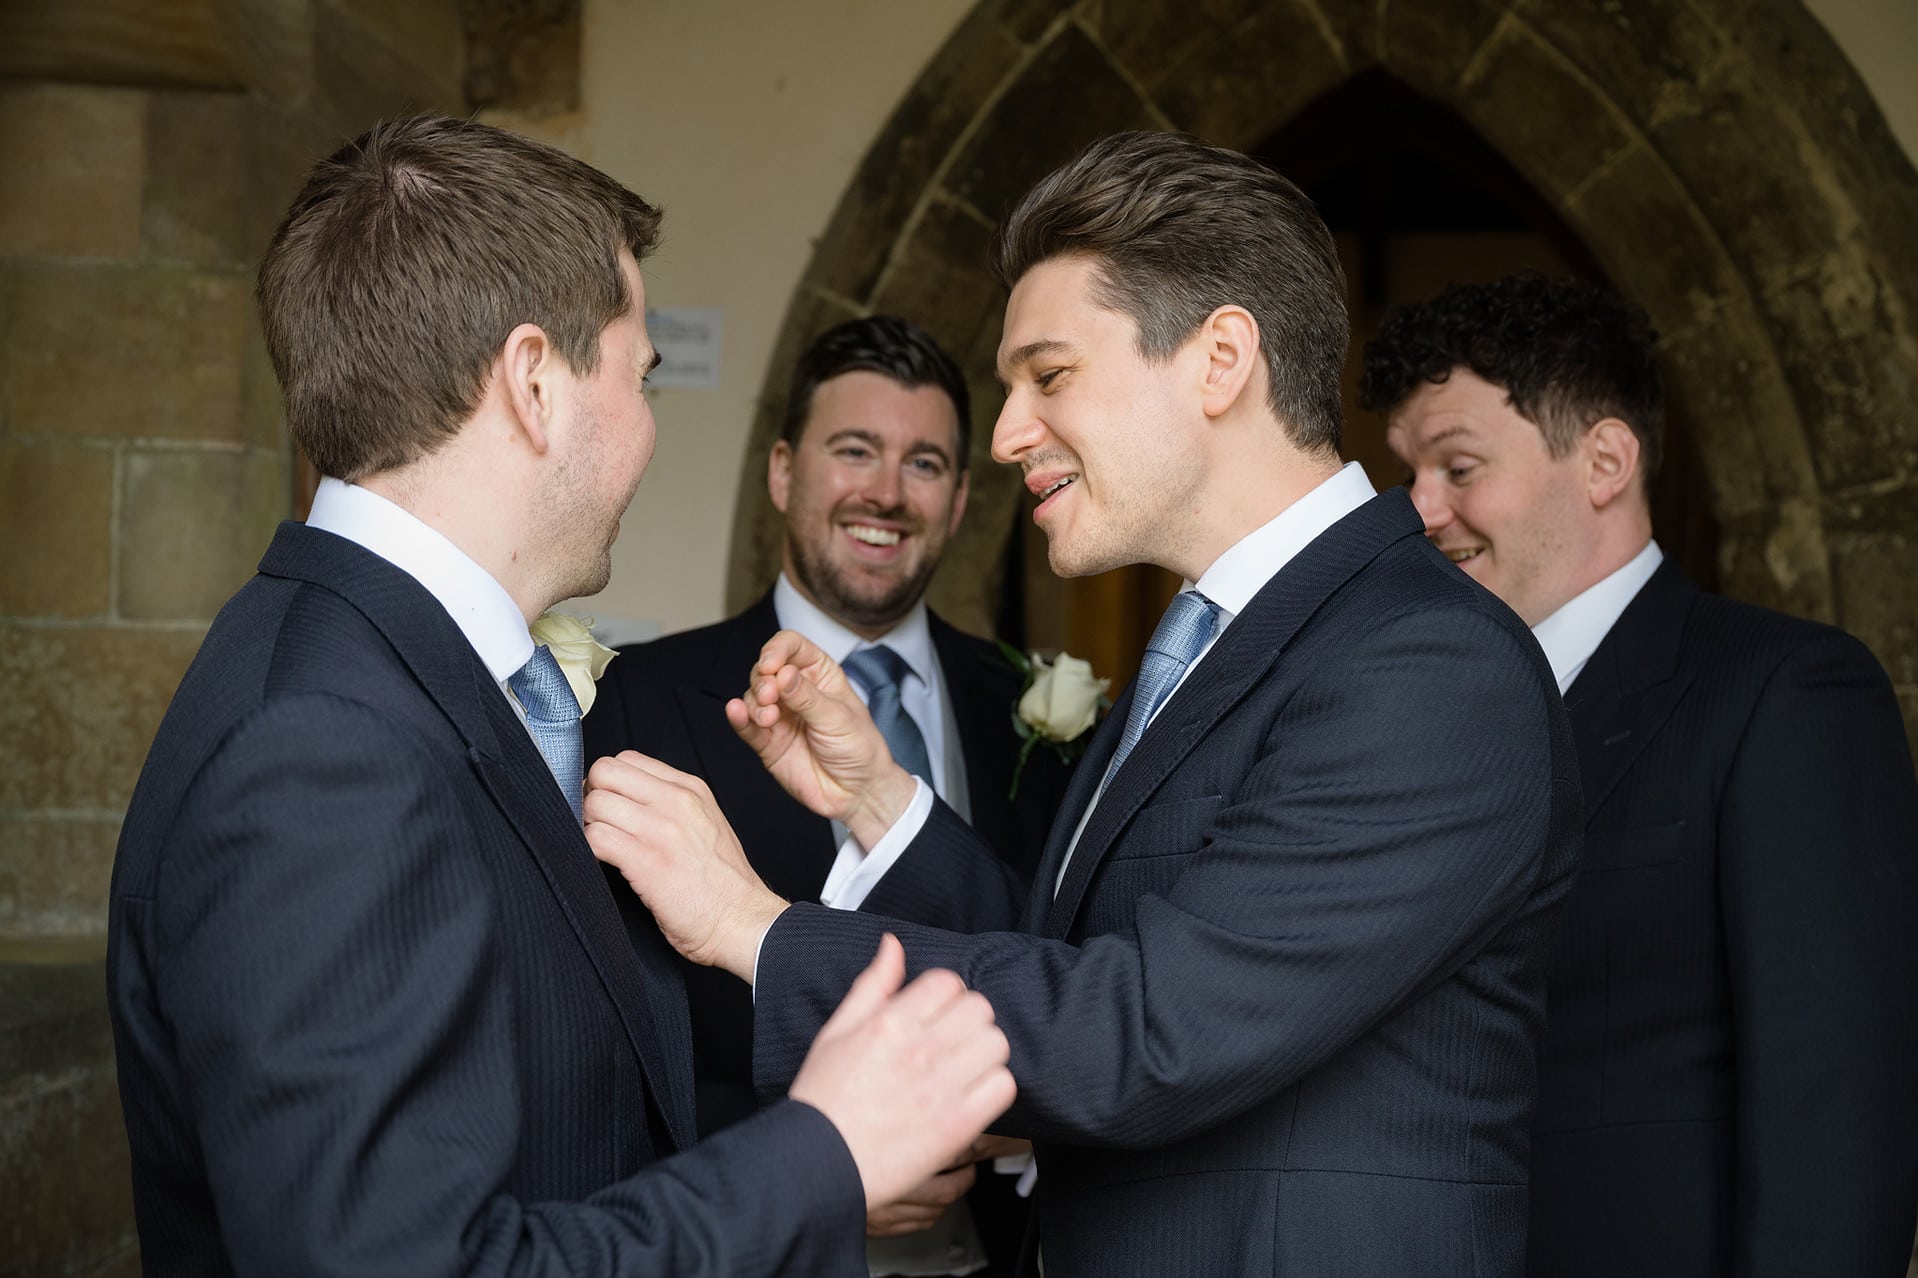 Groomsmen laughing as they try to pin on the groom's buttonhole